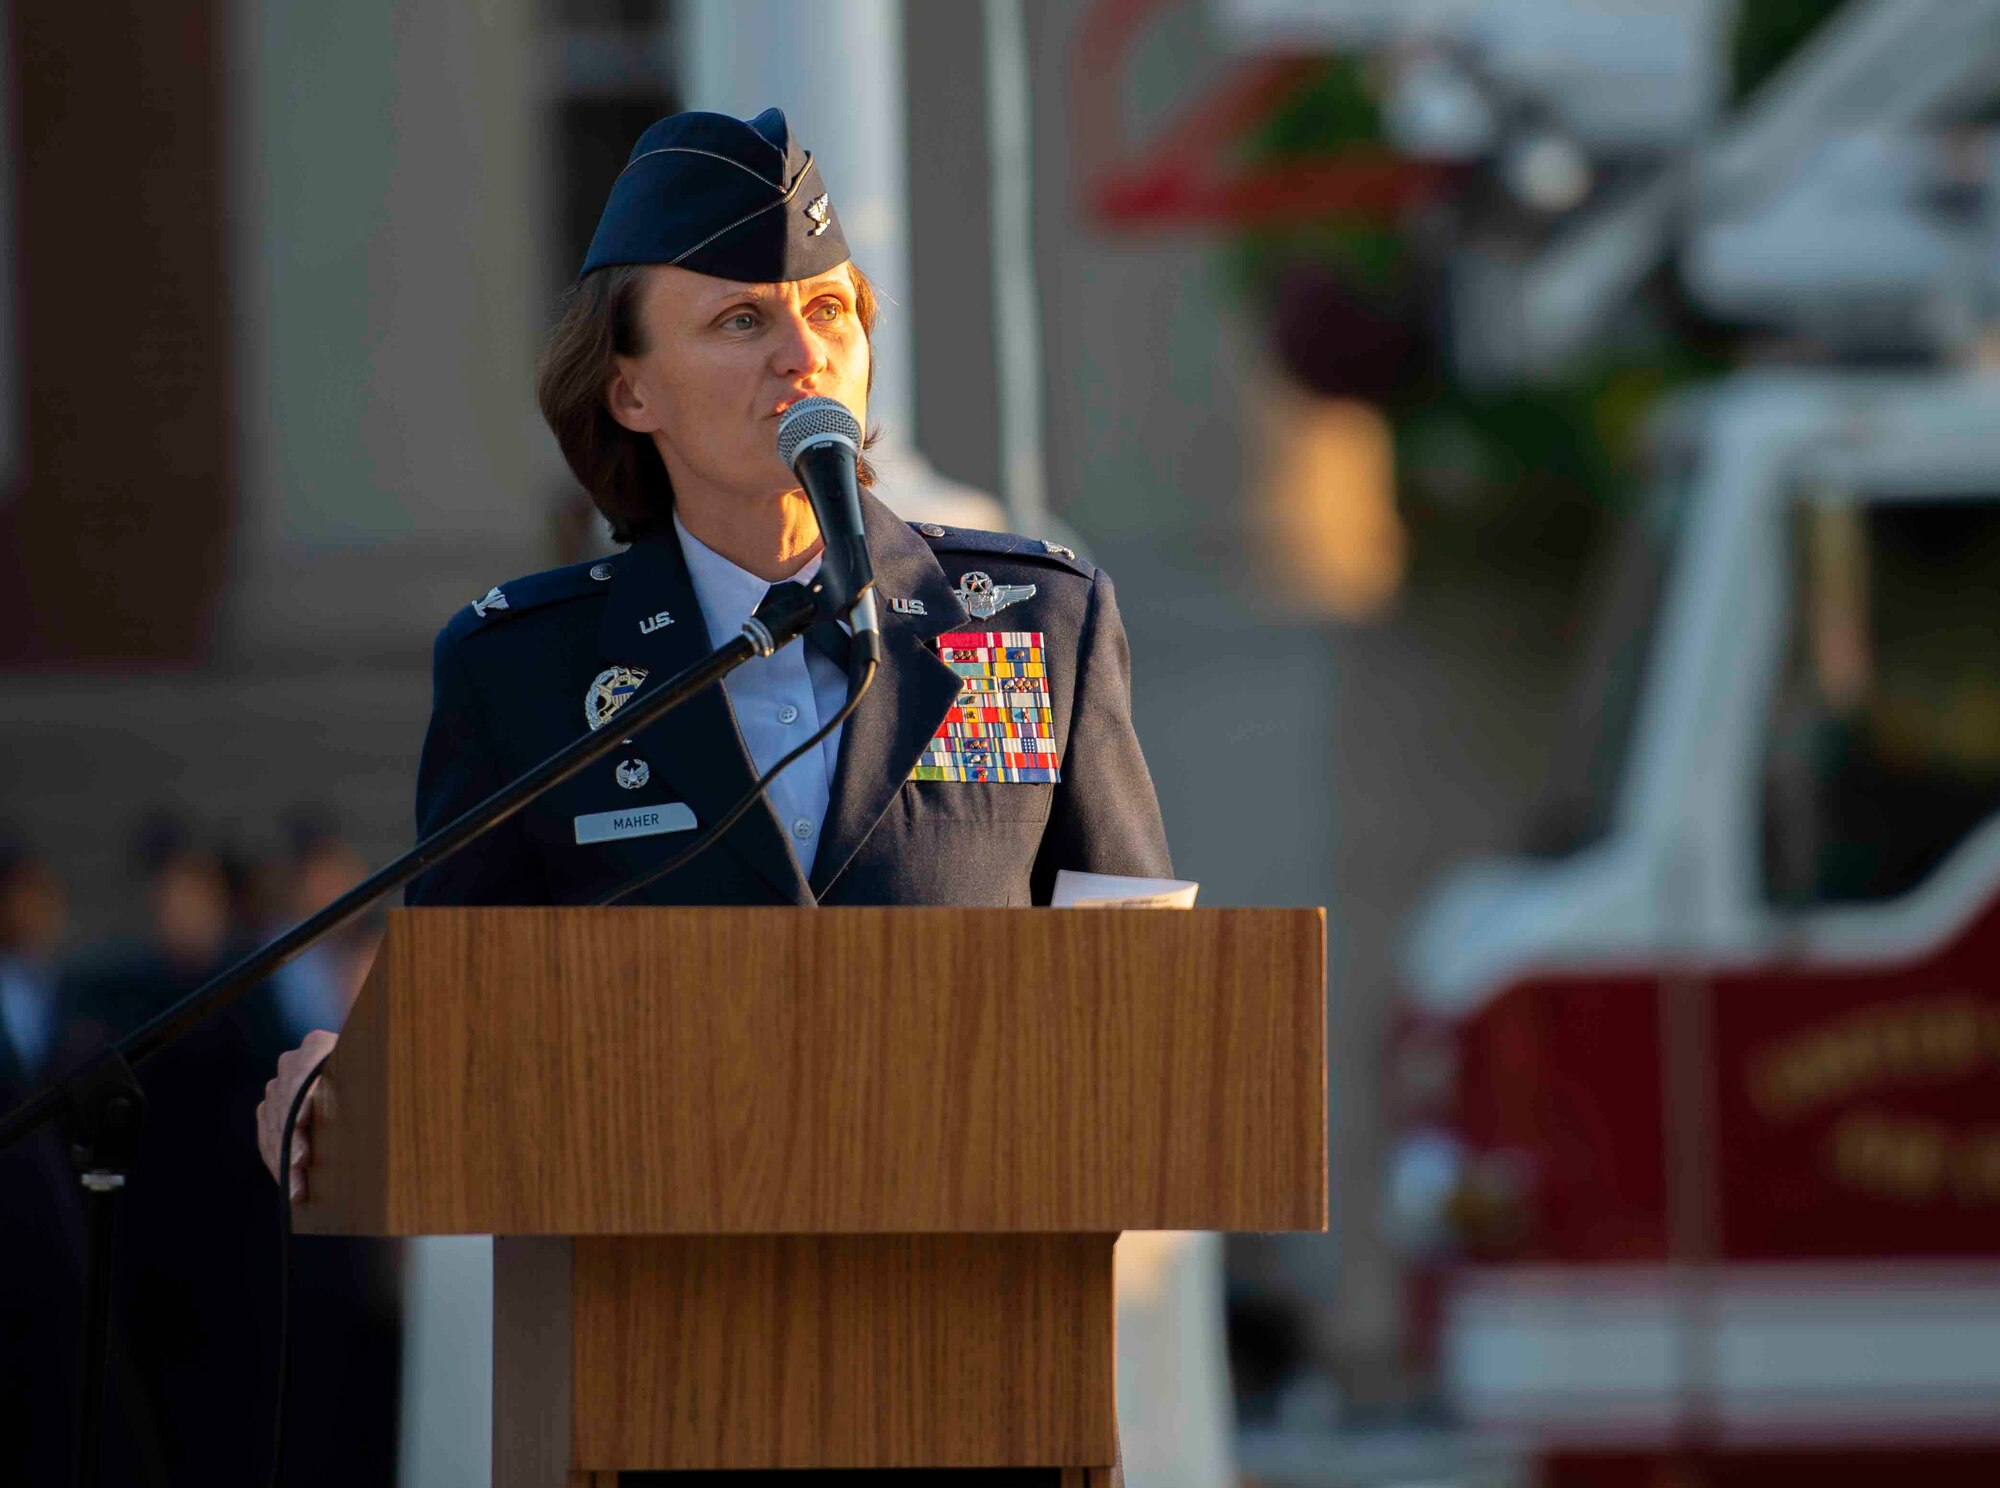 Col. Leslie Maher, 375th Air Mobility Wing commander, spoke during a 9/11 memorial ceremony, Sept. 11, 2018, at Scott Air Force Base, Illinois. Maher was working at the Pentagon at the time of the 2001 terrorist attacks. (U.S. Air Force photo by Airman 1st Class Tara Stetler)